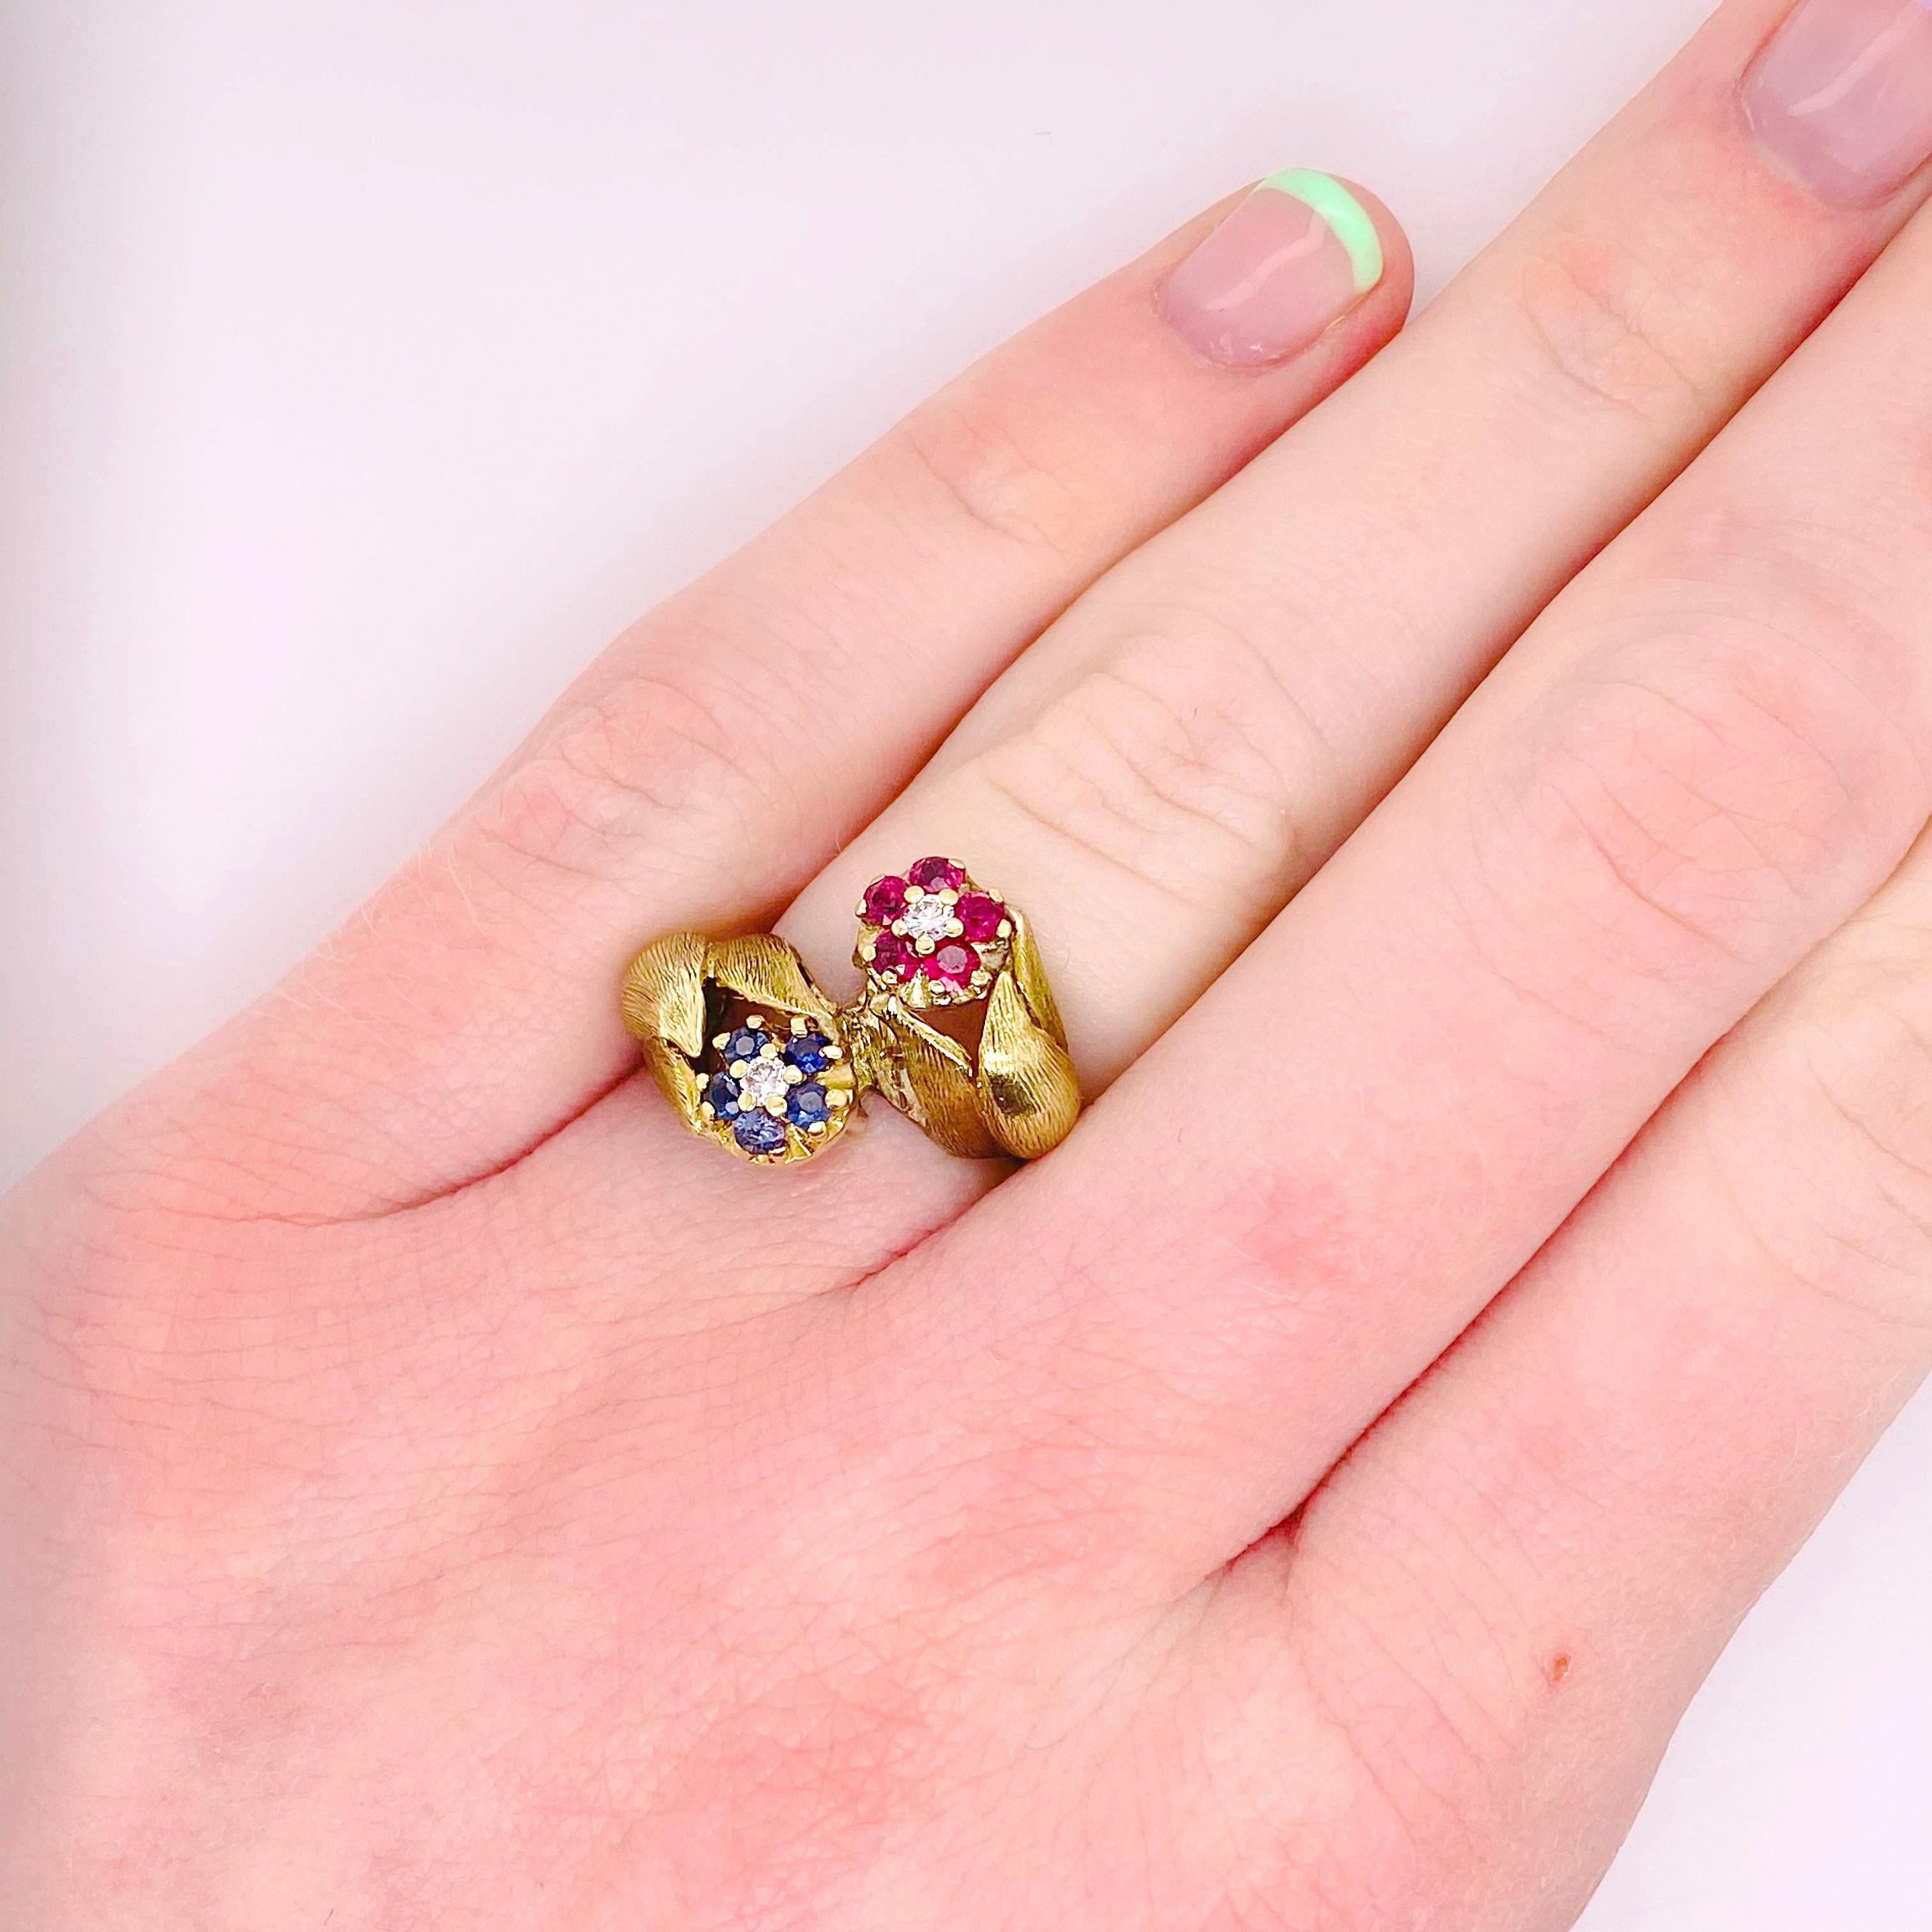 This lovely tulip ring has two gemstone flower clusters accented with diamonds in a very unique styling. Tulip rings were popular in the 1970s and 1980s and this tulip ring has a new twist on the tulip design. A gorgeously detailed gold tulip wraps